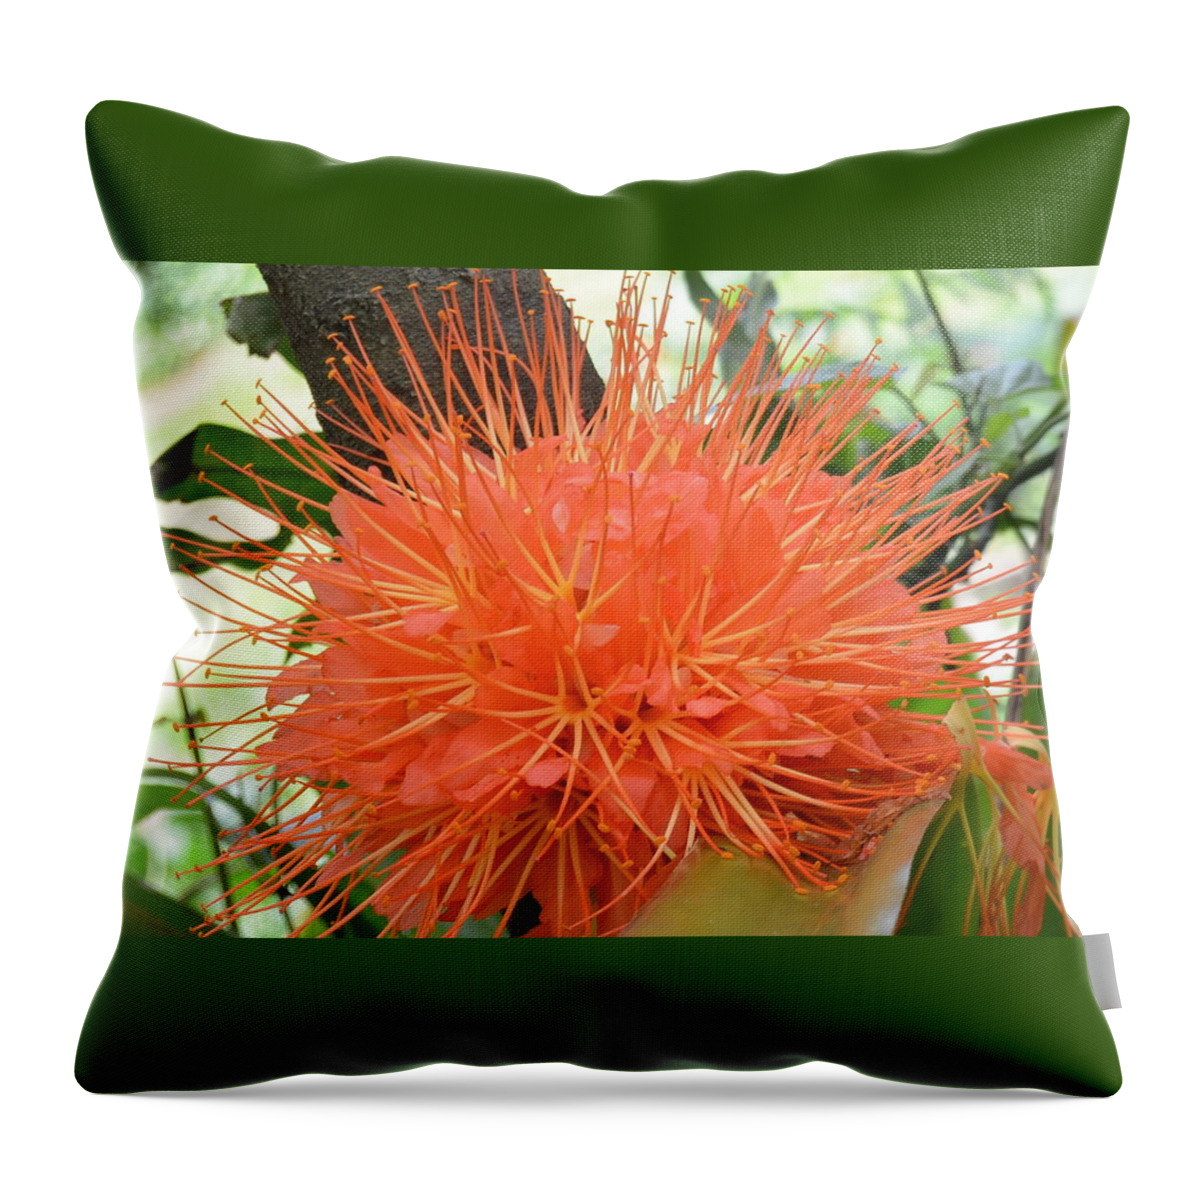 Kauai Throw Pillow featuring the photograph Scarlet Flame Bean Flower by Amy Fose